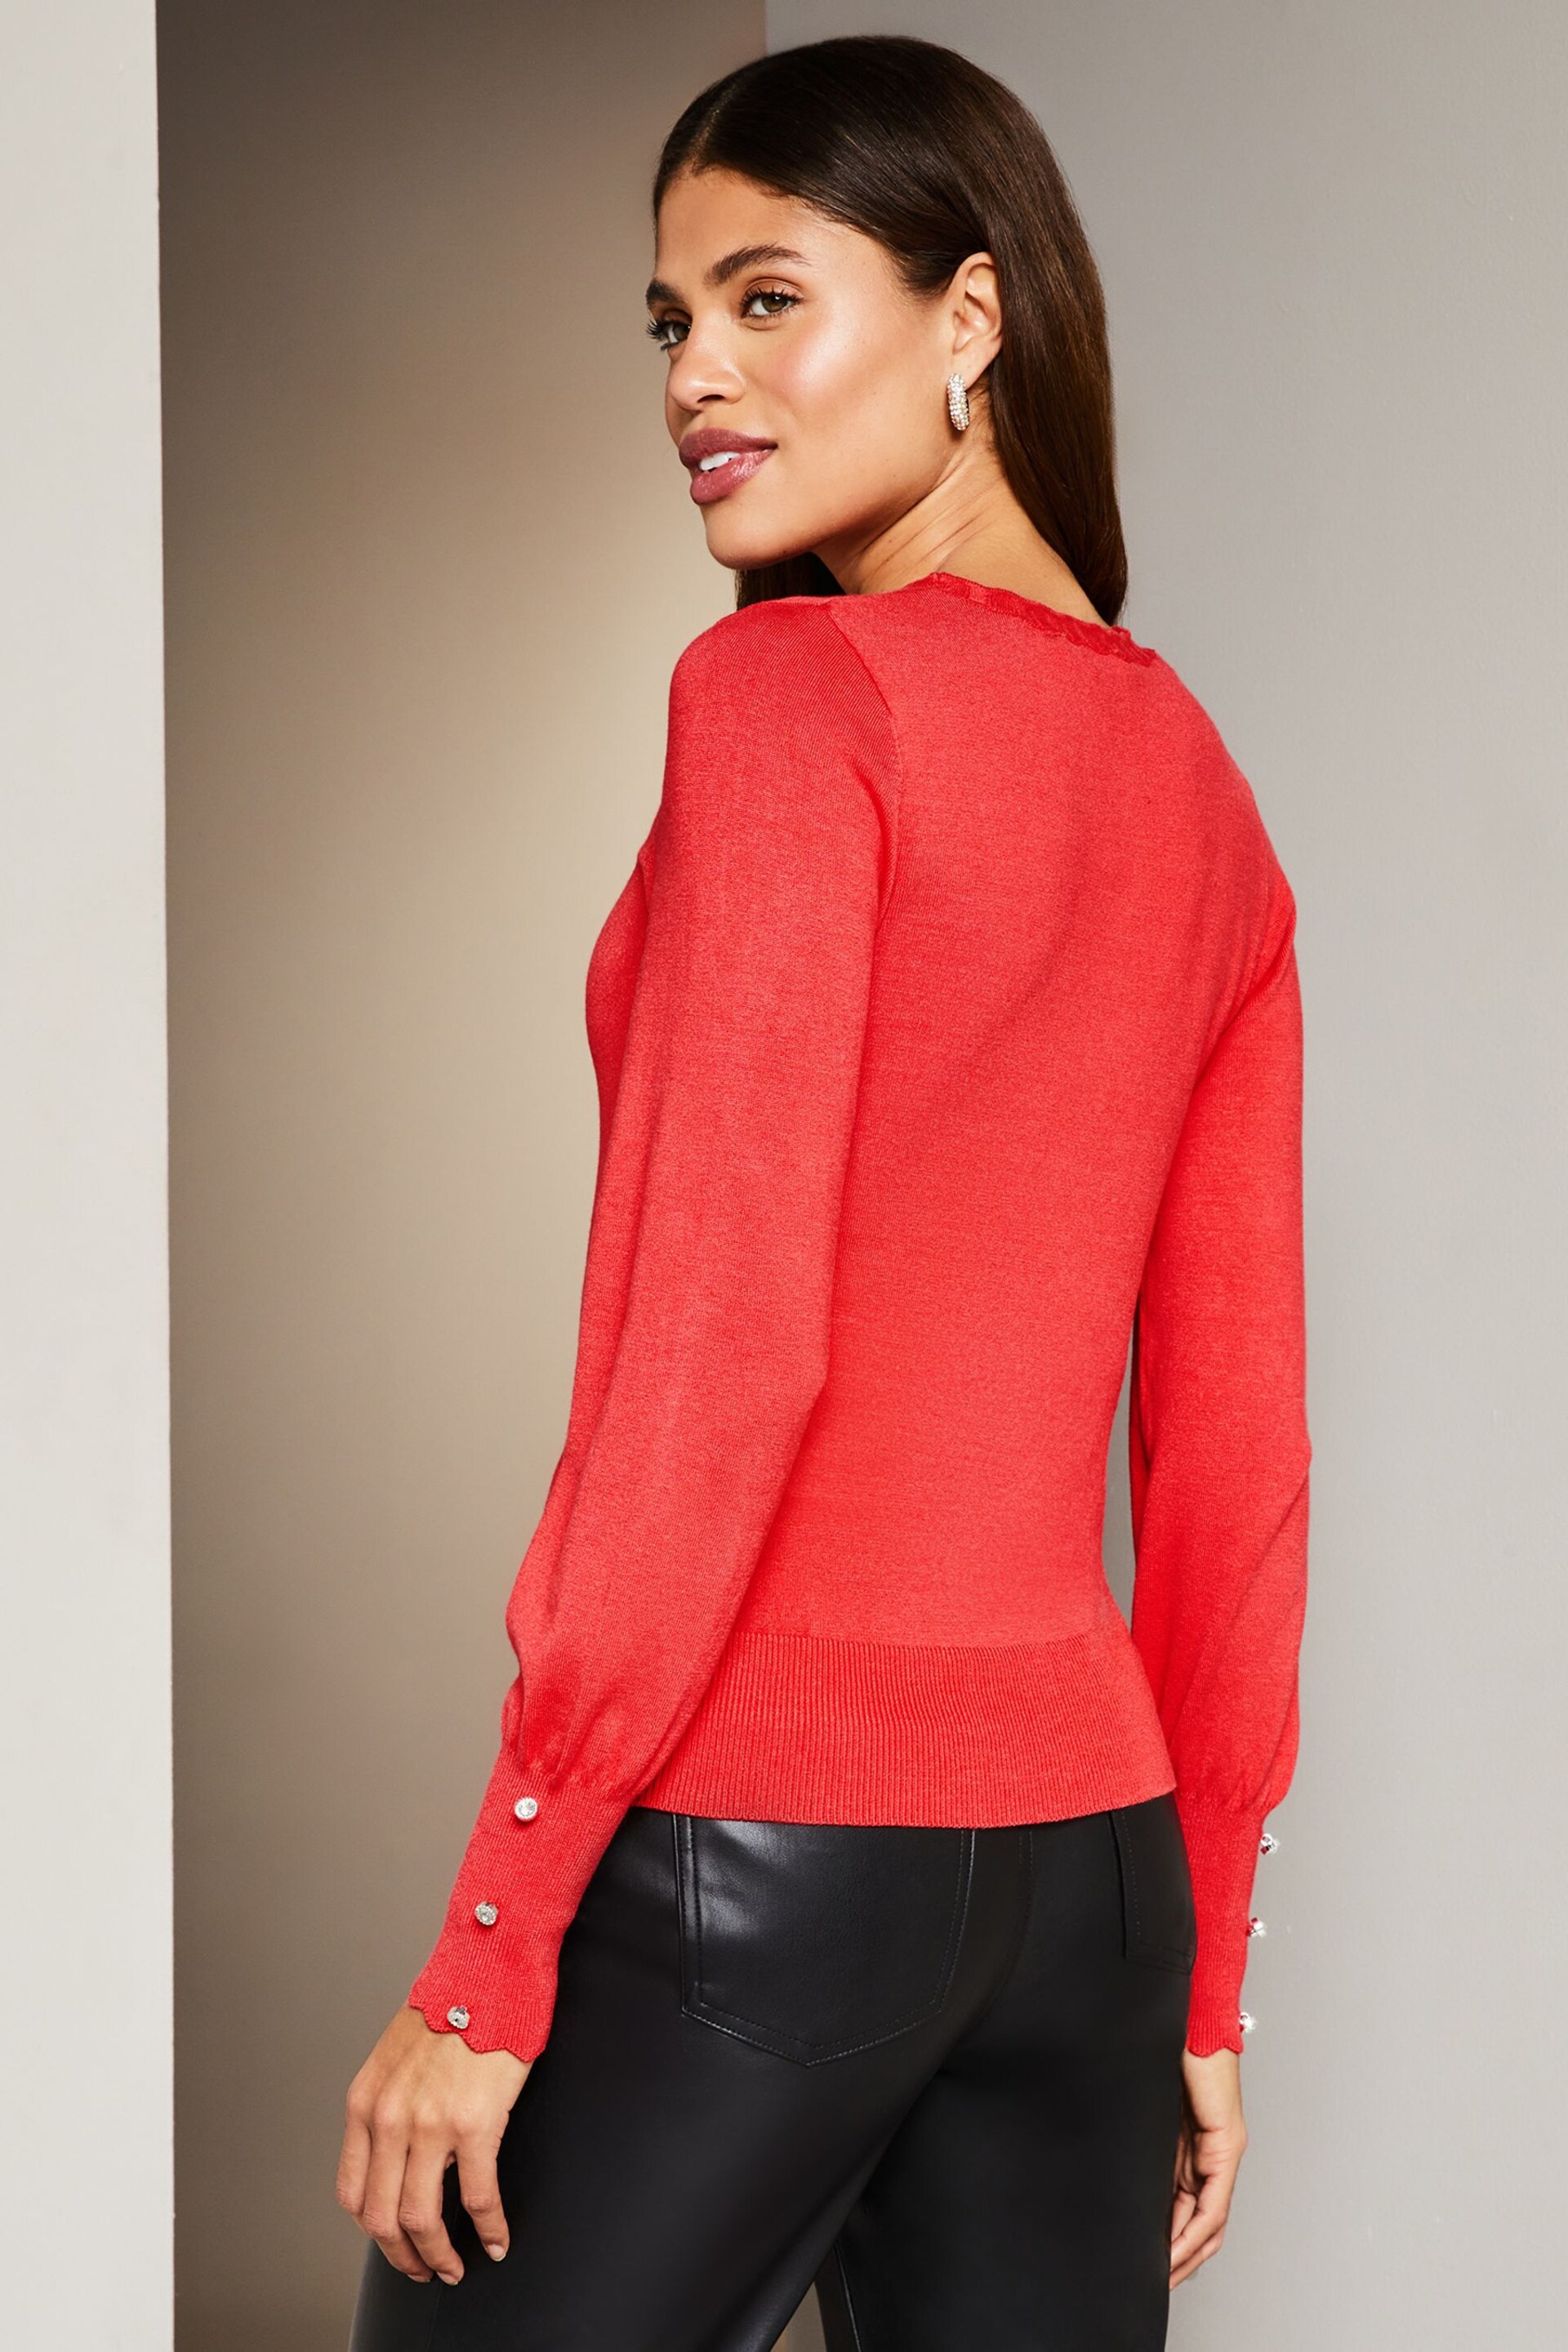 Lipsy Pomegranate Pnk Long Sleeve Scallop Detail Knitted Jumper - Image 2 of 4